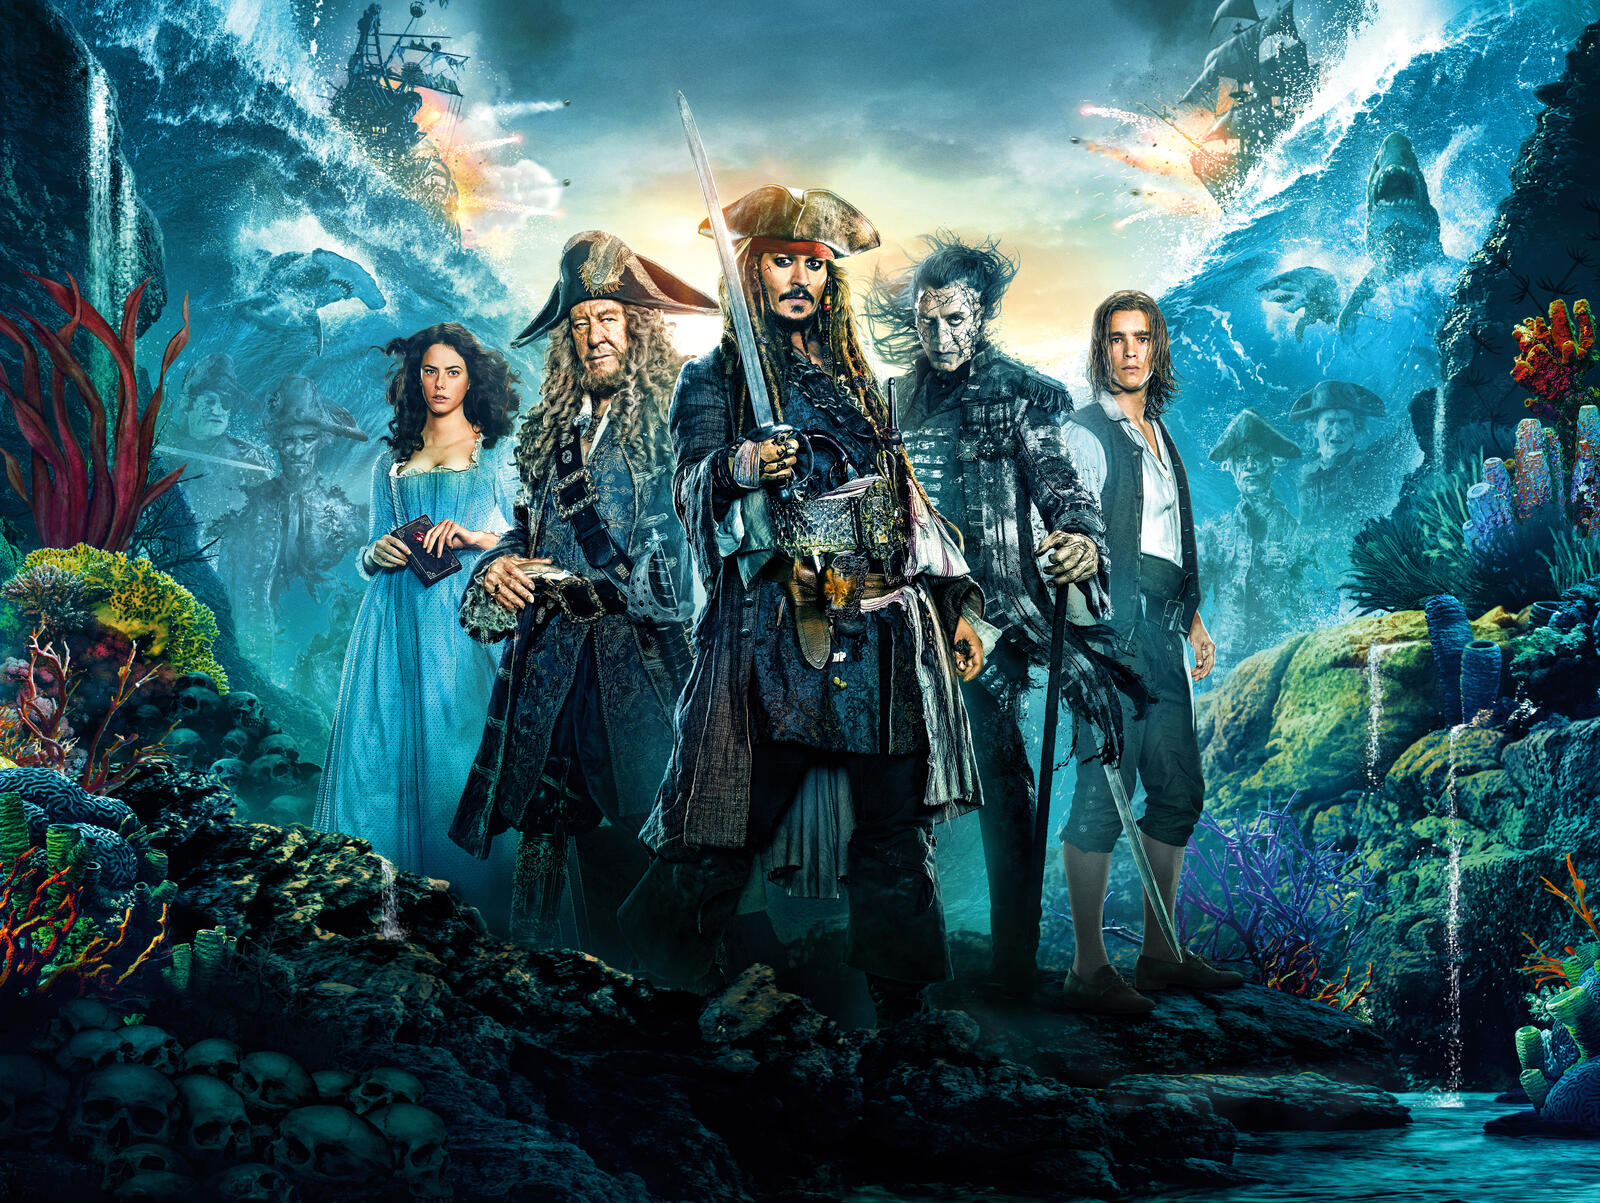 Wallpapers Pirates of the Caribbean: Dead men tell no tales film fantasy on the desktop